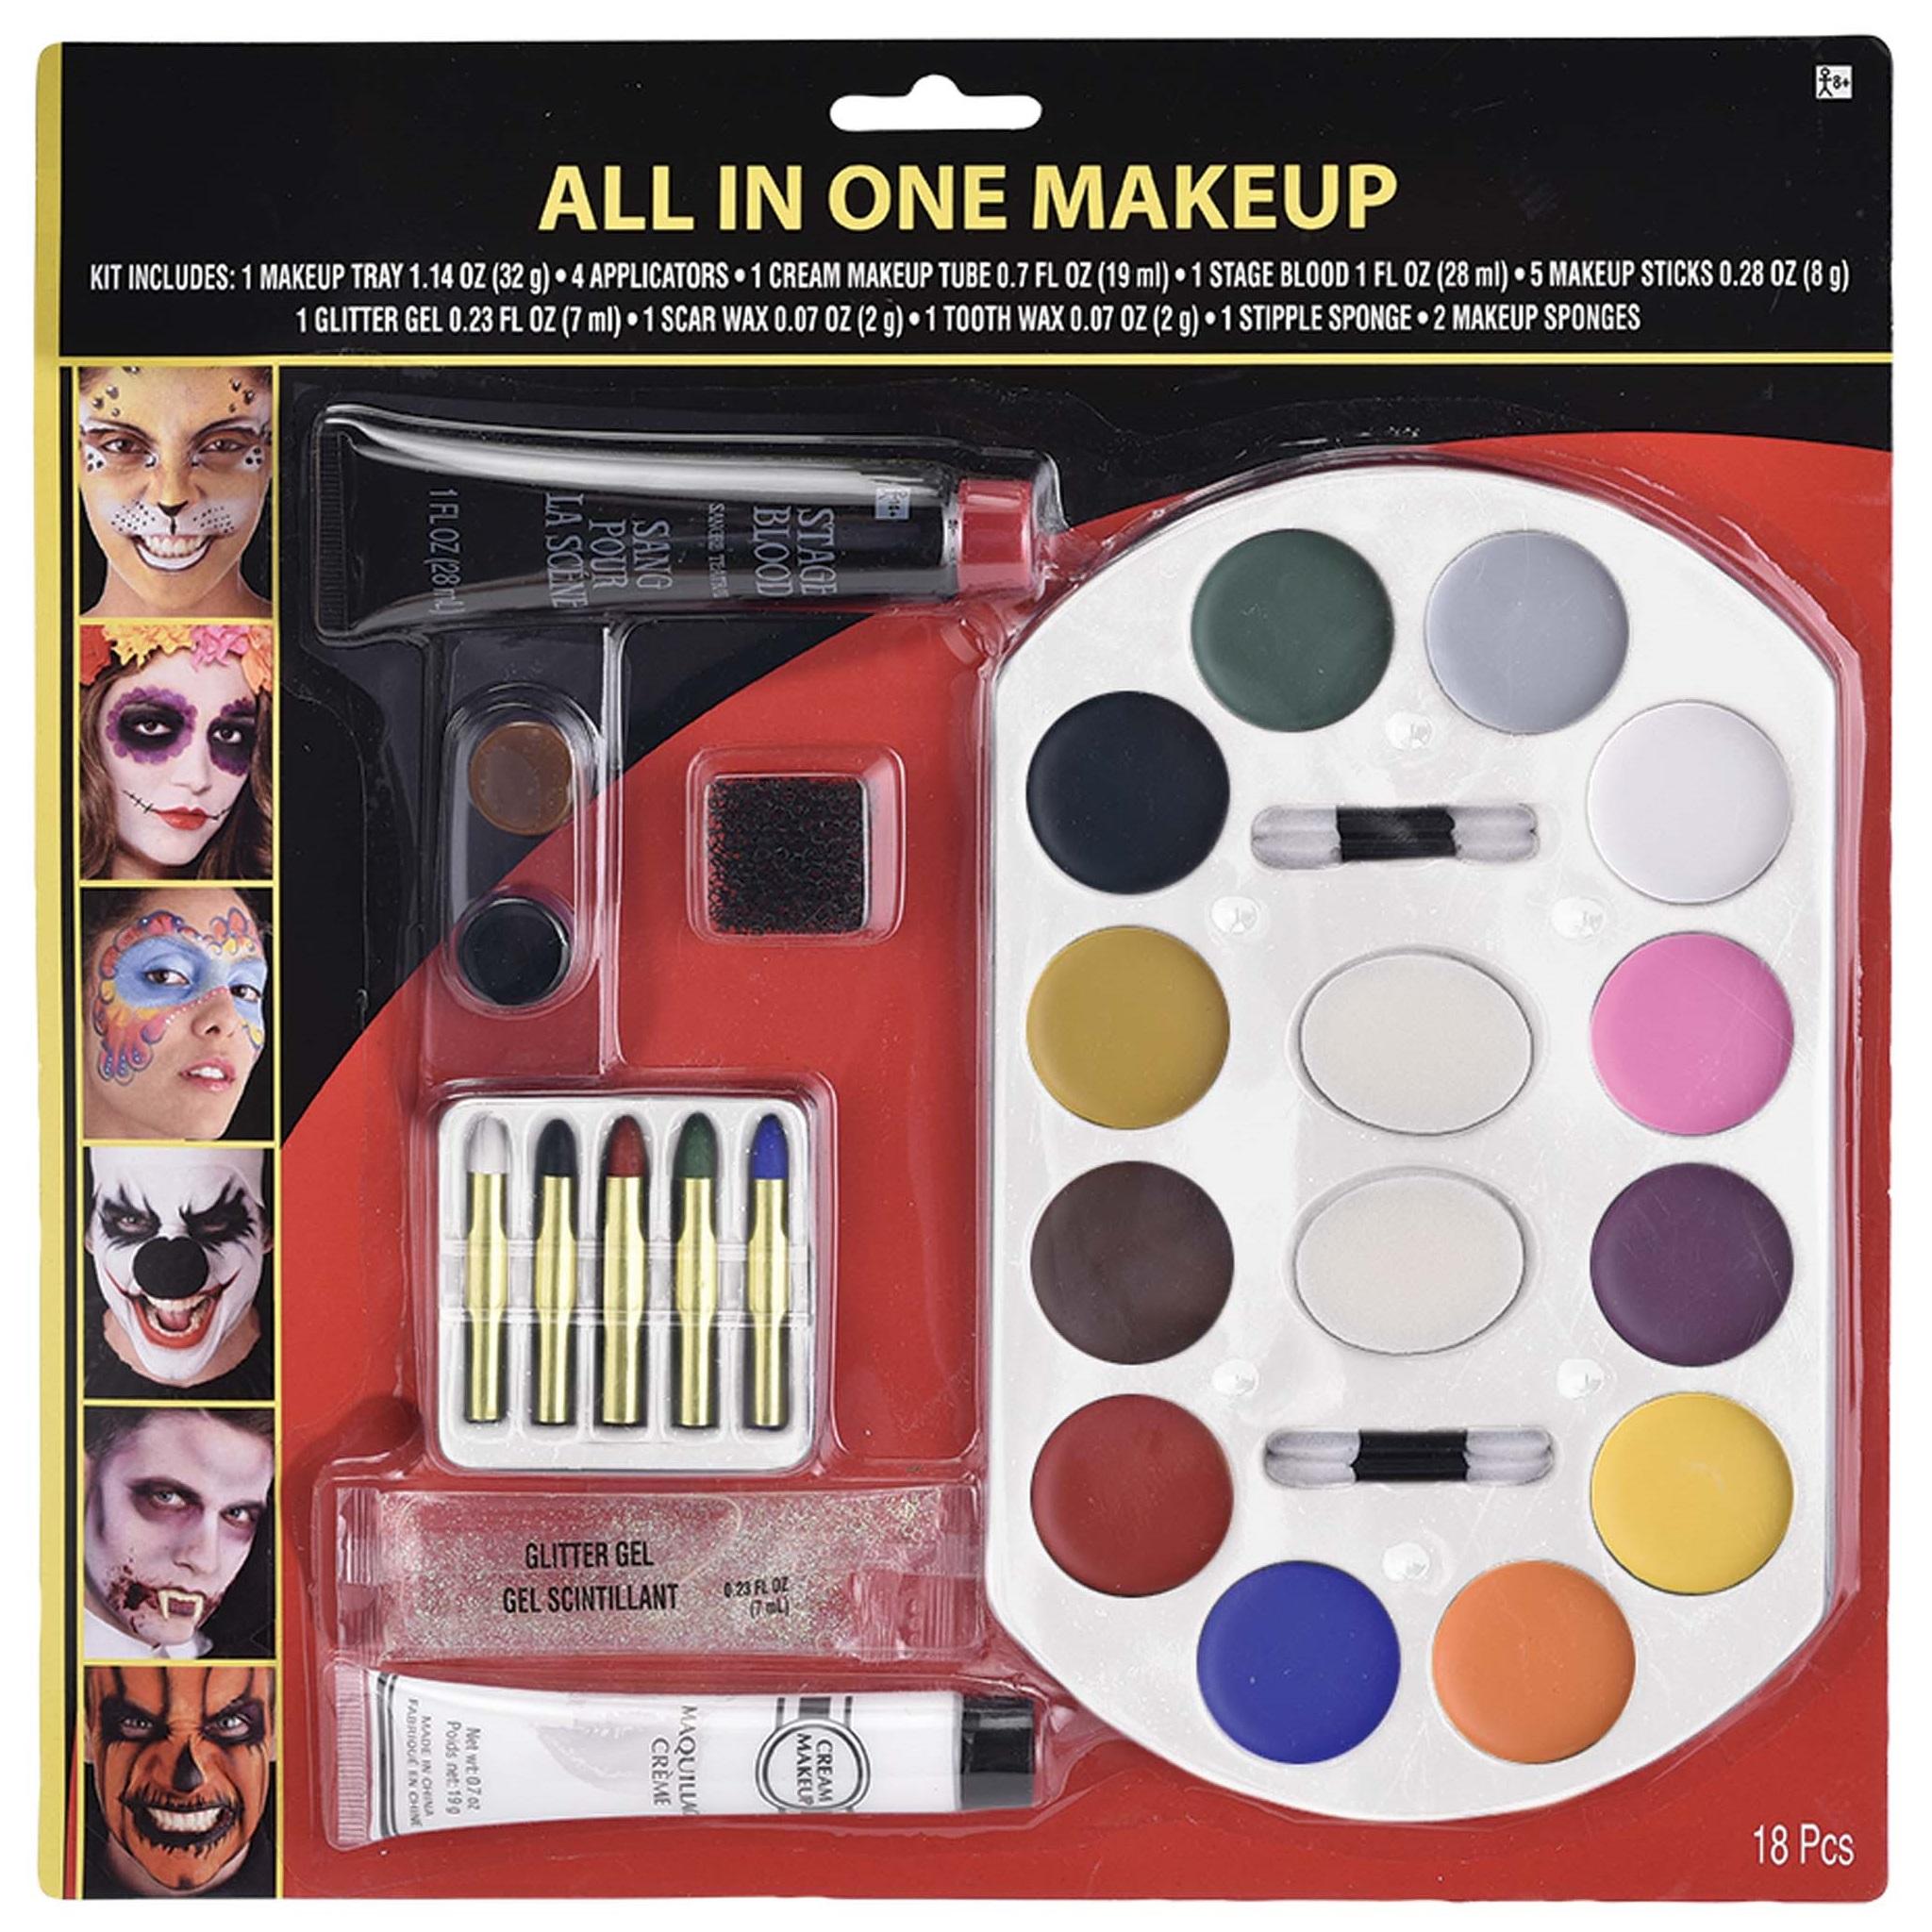 All In One Makeup Kit Costumes & Apparel - Party Centre